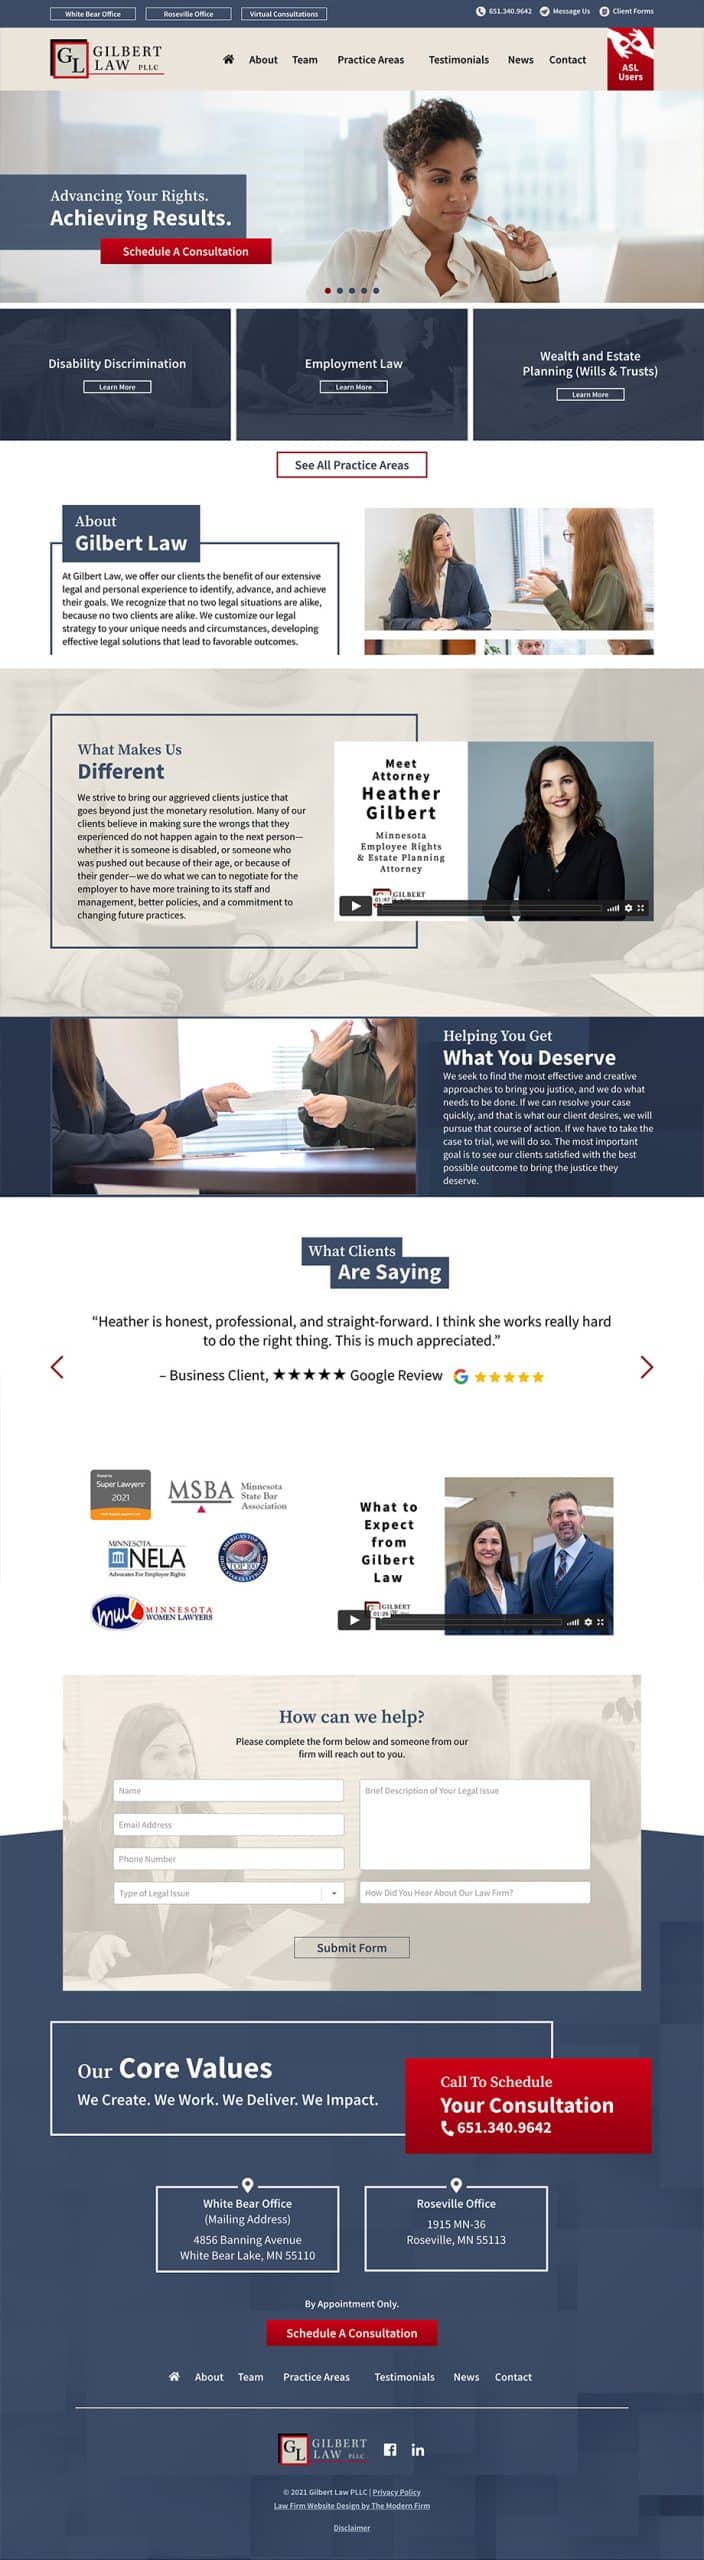 Law Firm Website for Gilbert Law PLLC